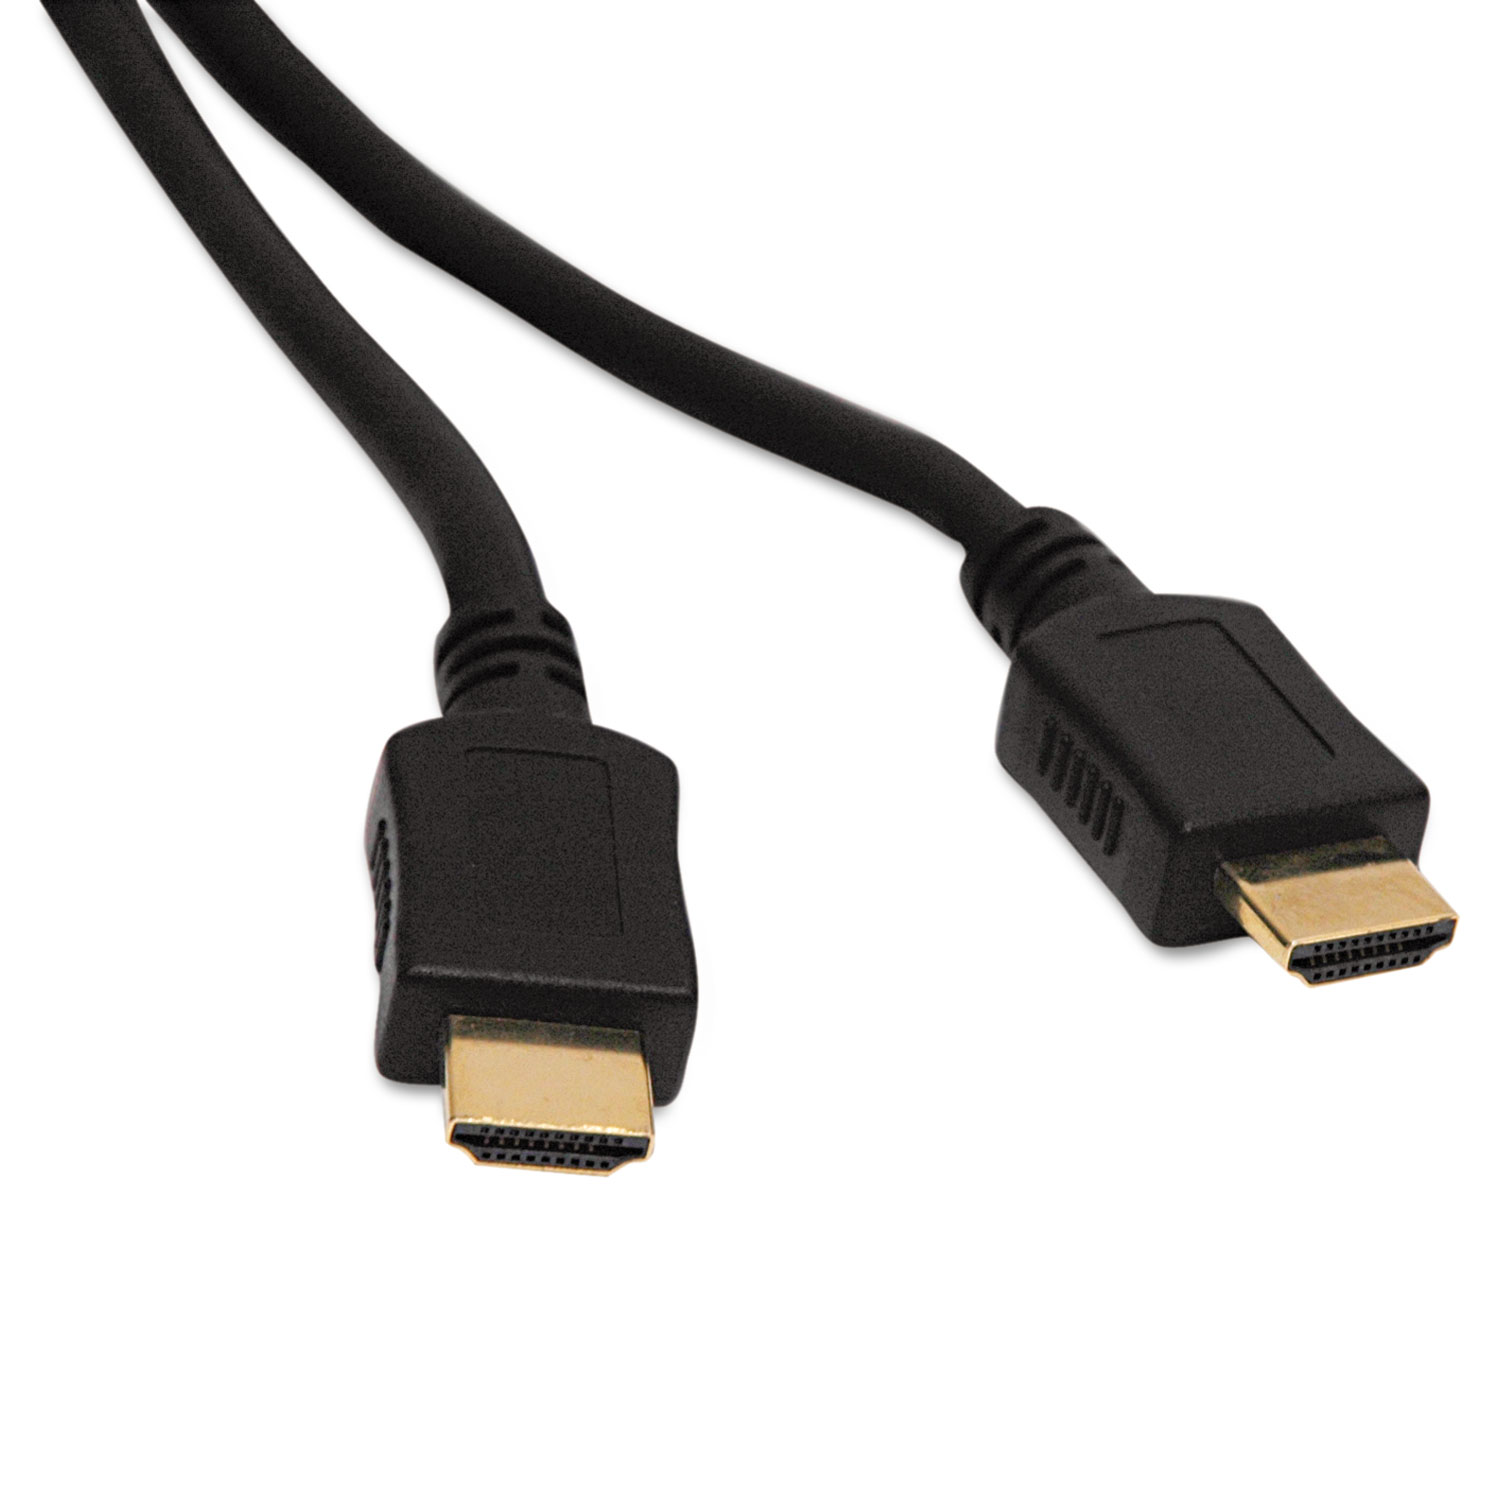  Tripp Lite P568-006 High Speed HDMI Cable, Ultra HD 4K x 2K, Digital Video with Audio (M/M), 6 ft. (TRPP568006) 